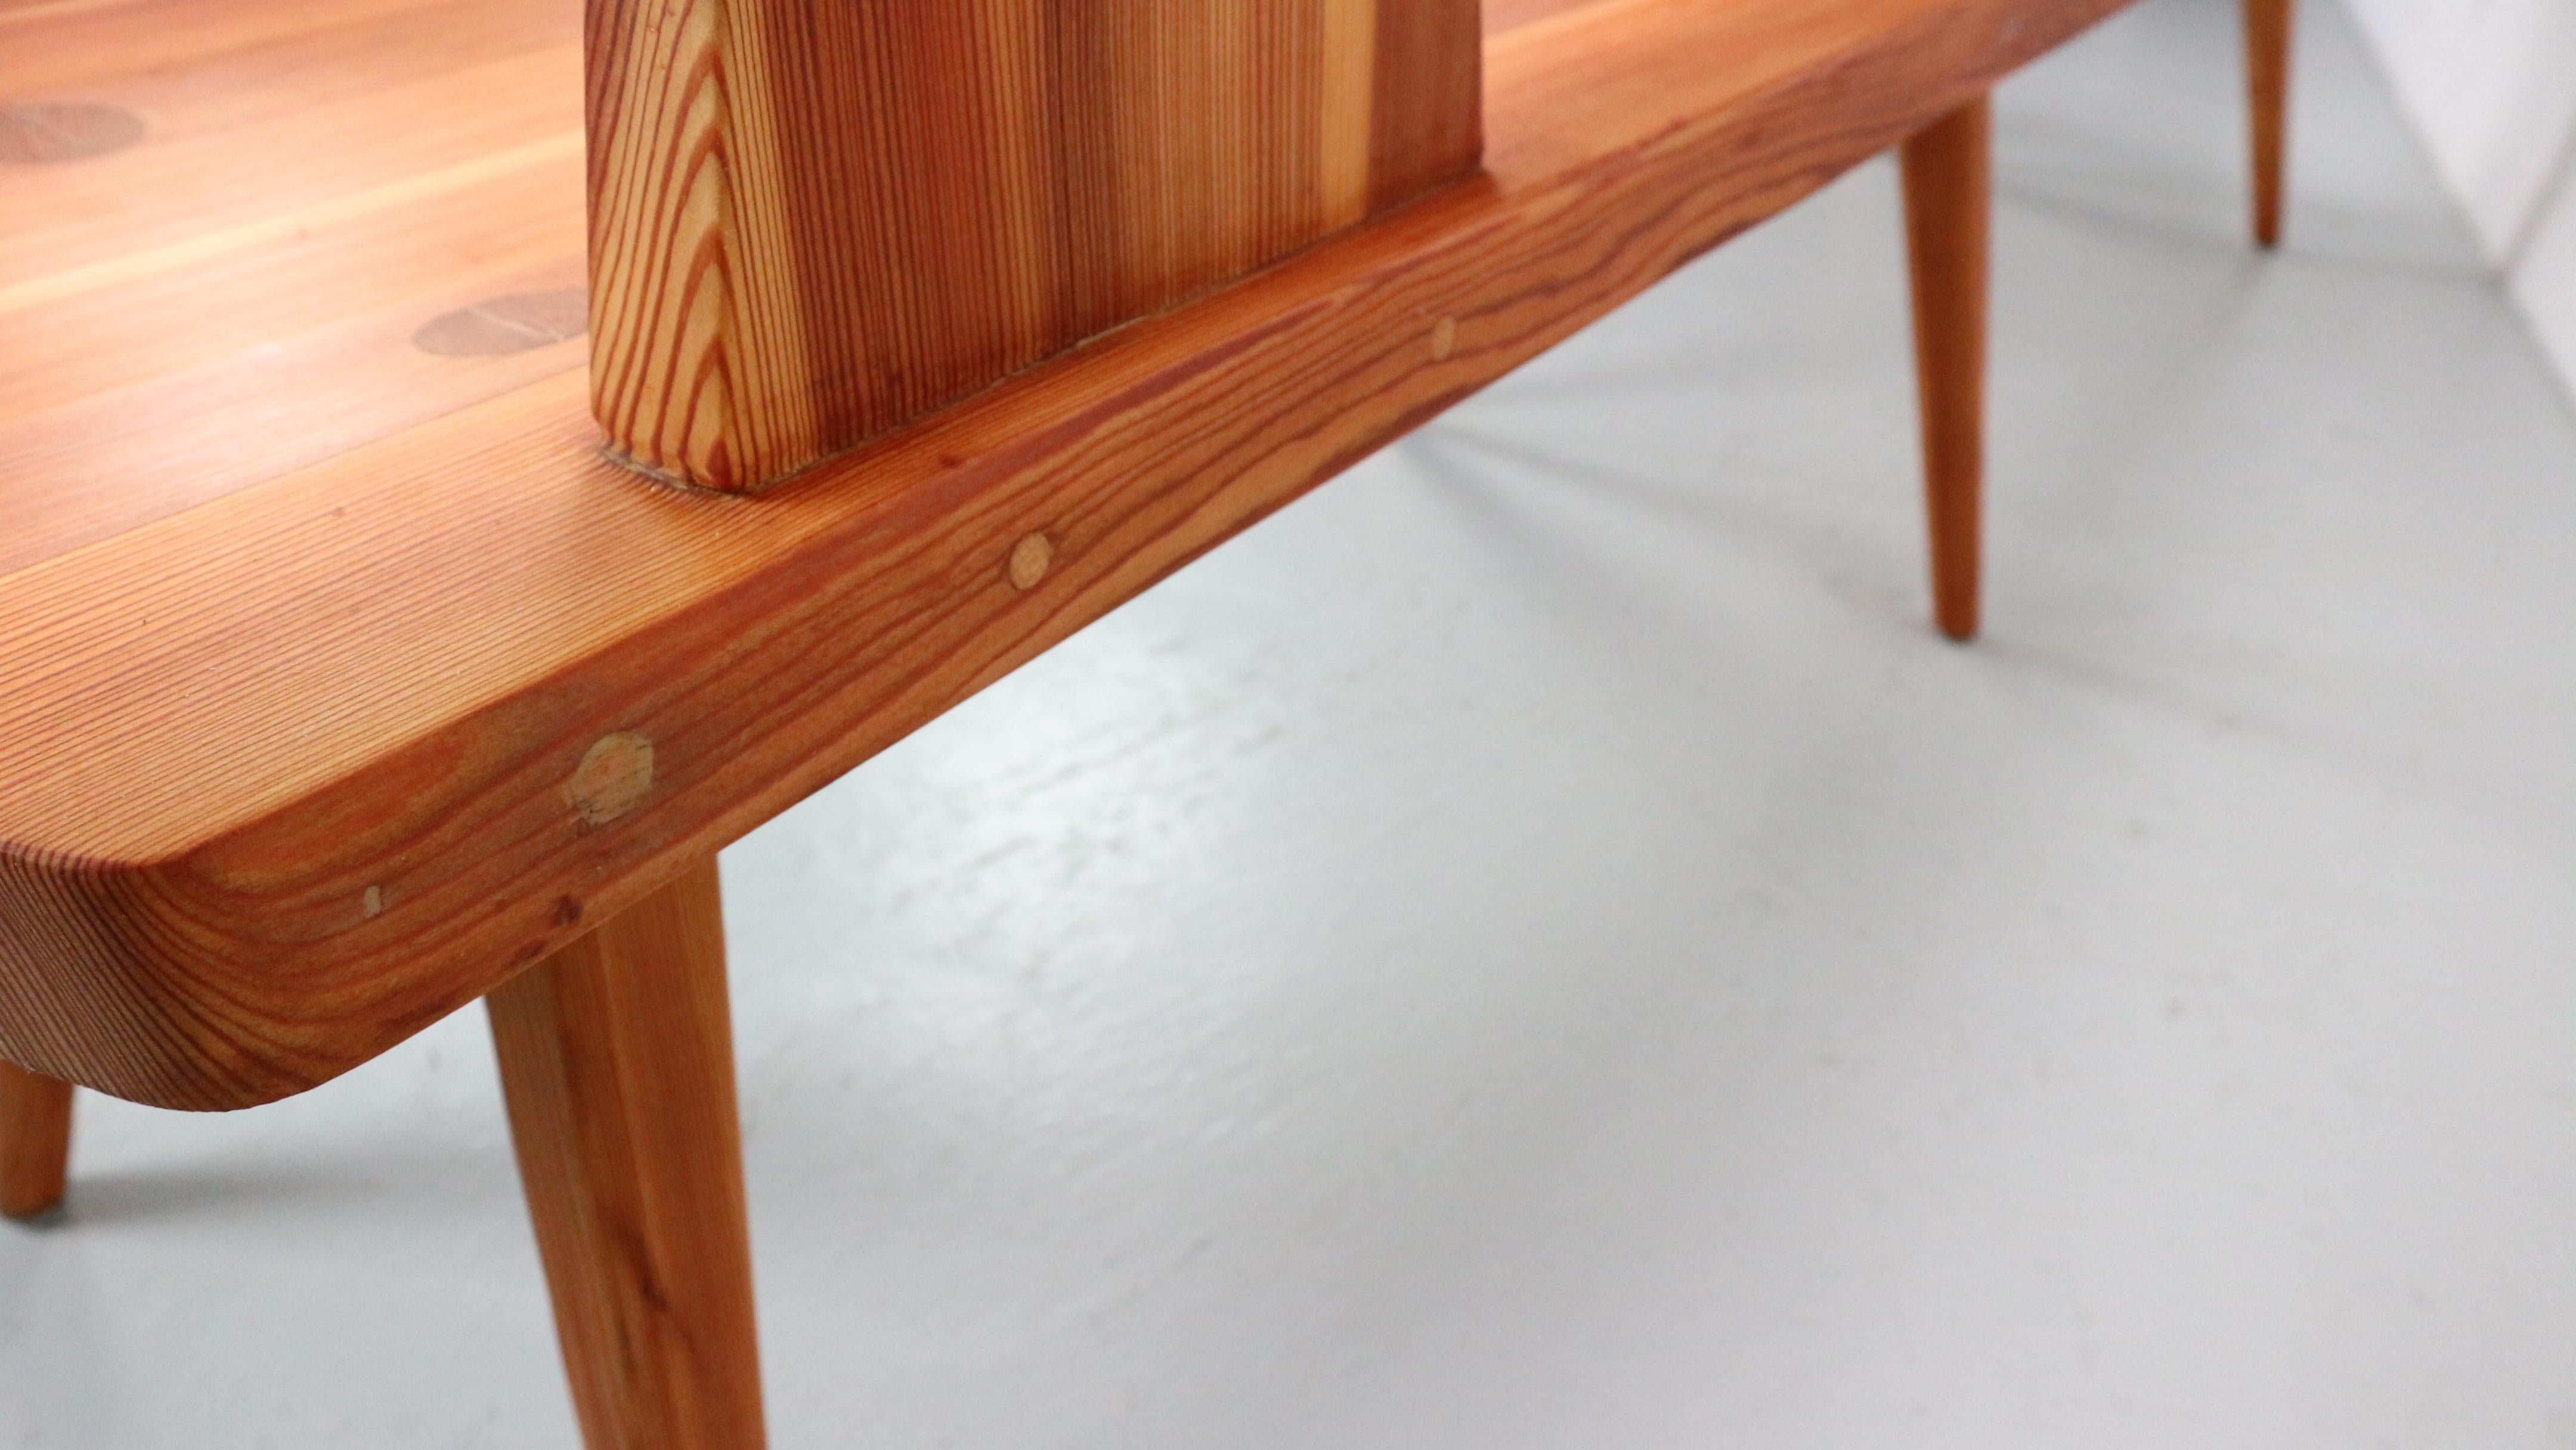 Jacob Kielland Brandt Bench in Pine Wood for Christiansen, Handcrafted, 1960s For Sale 8